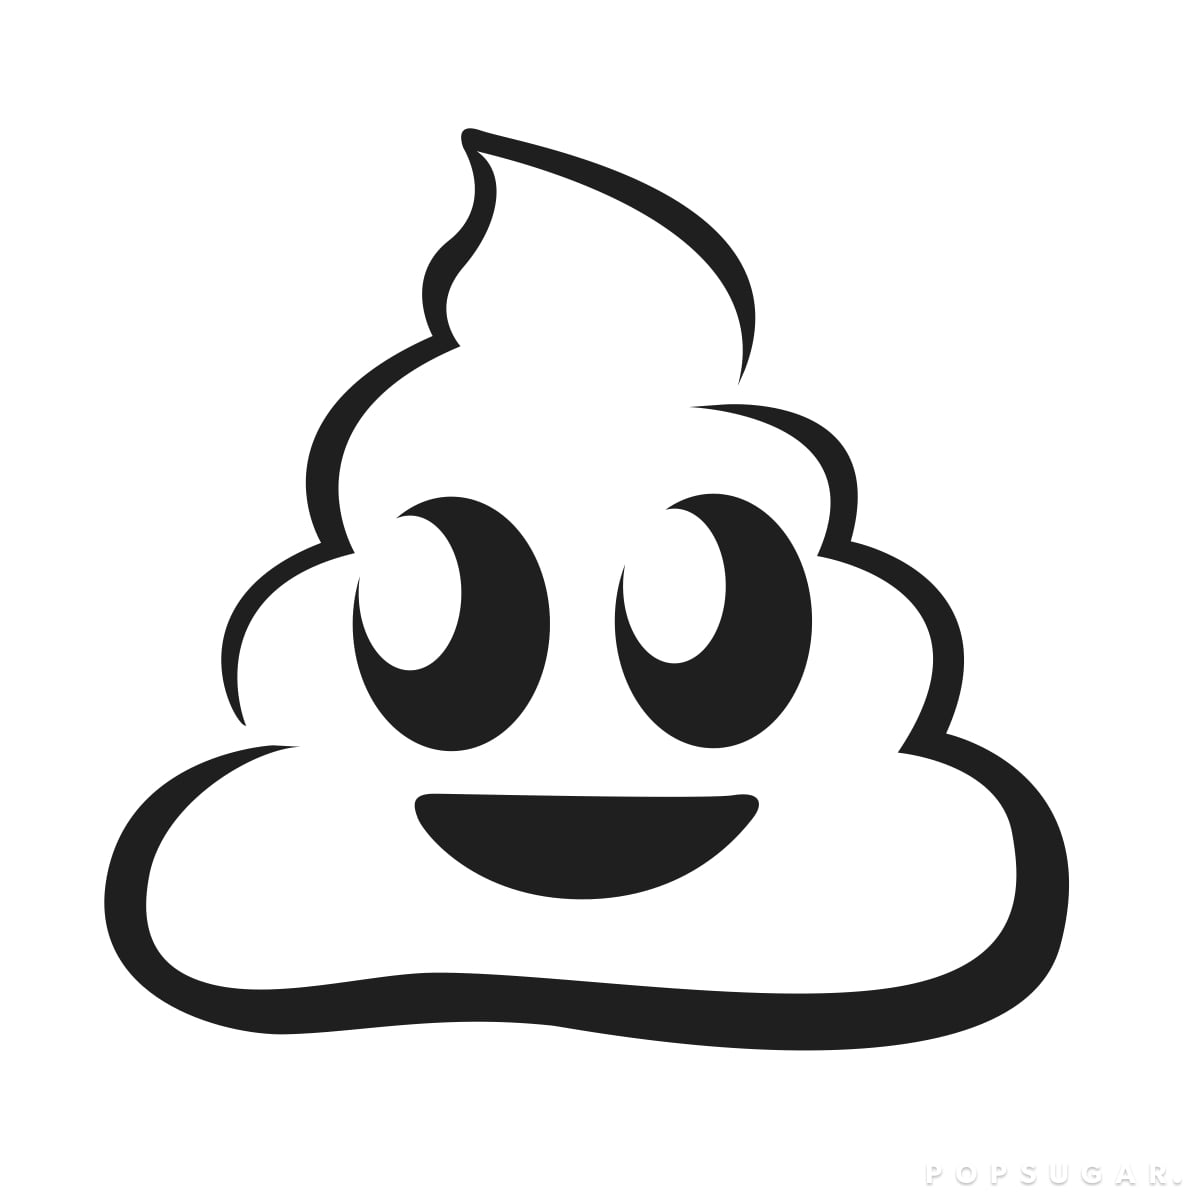 Pile Of Poo Emoji Templates By Morgan Pugh 49 Free Templates For The 